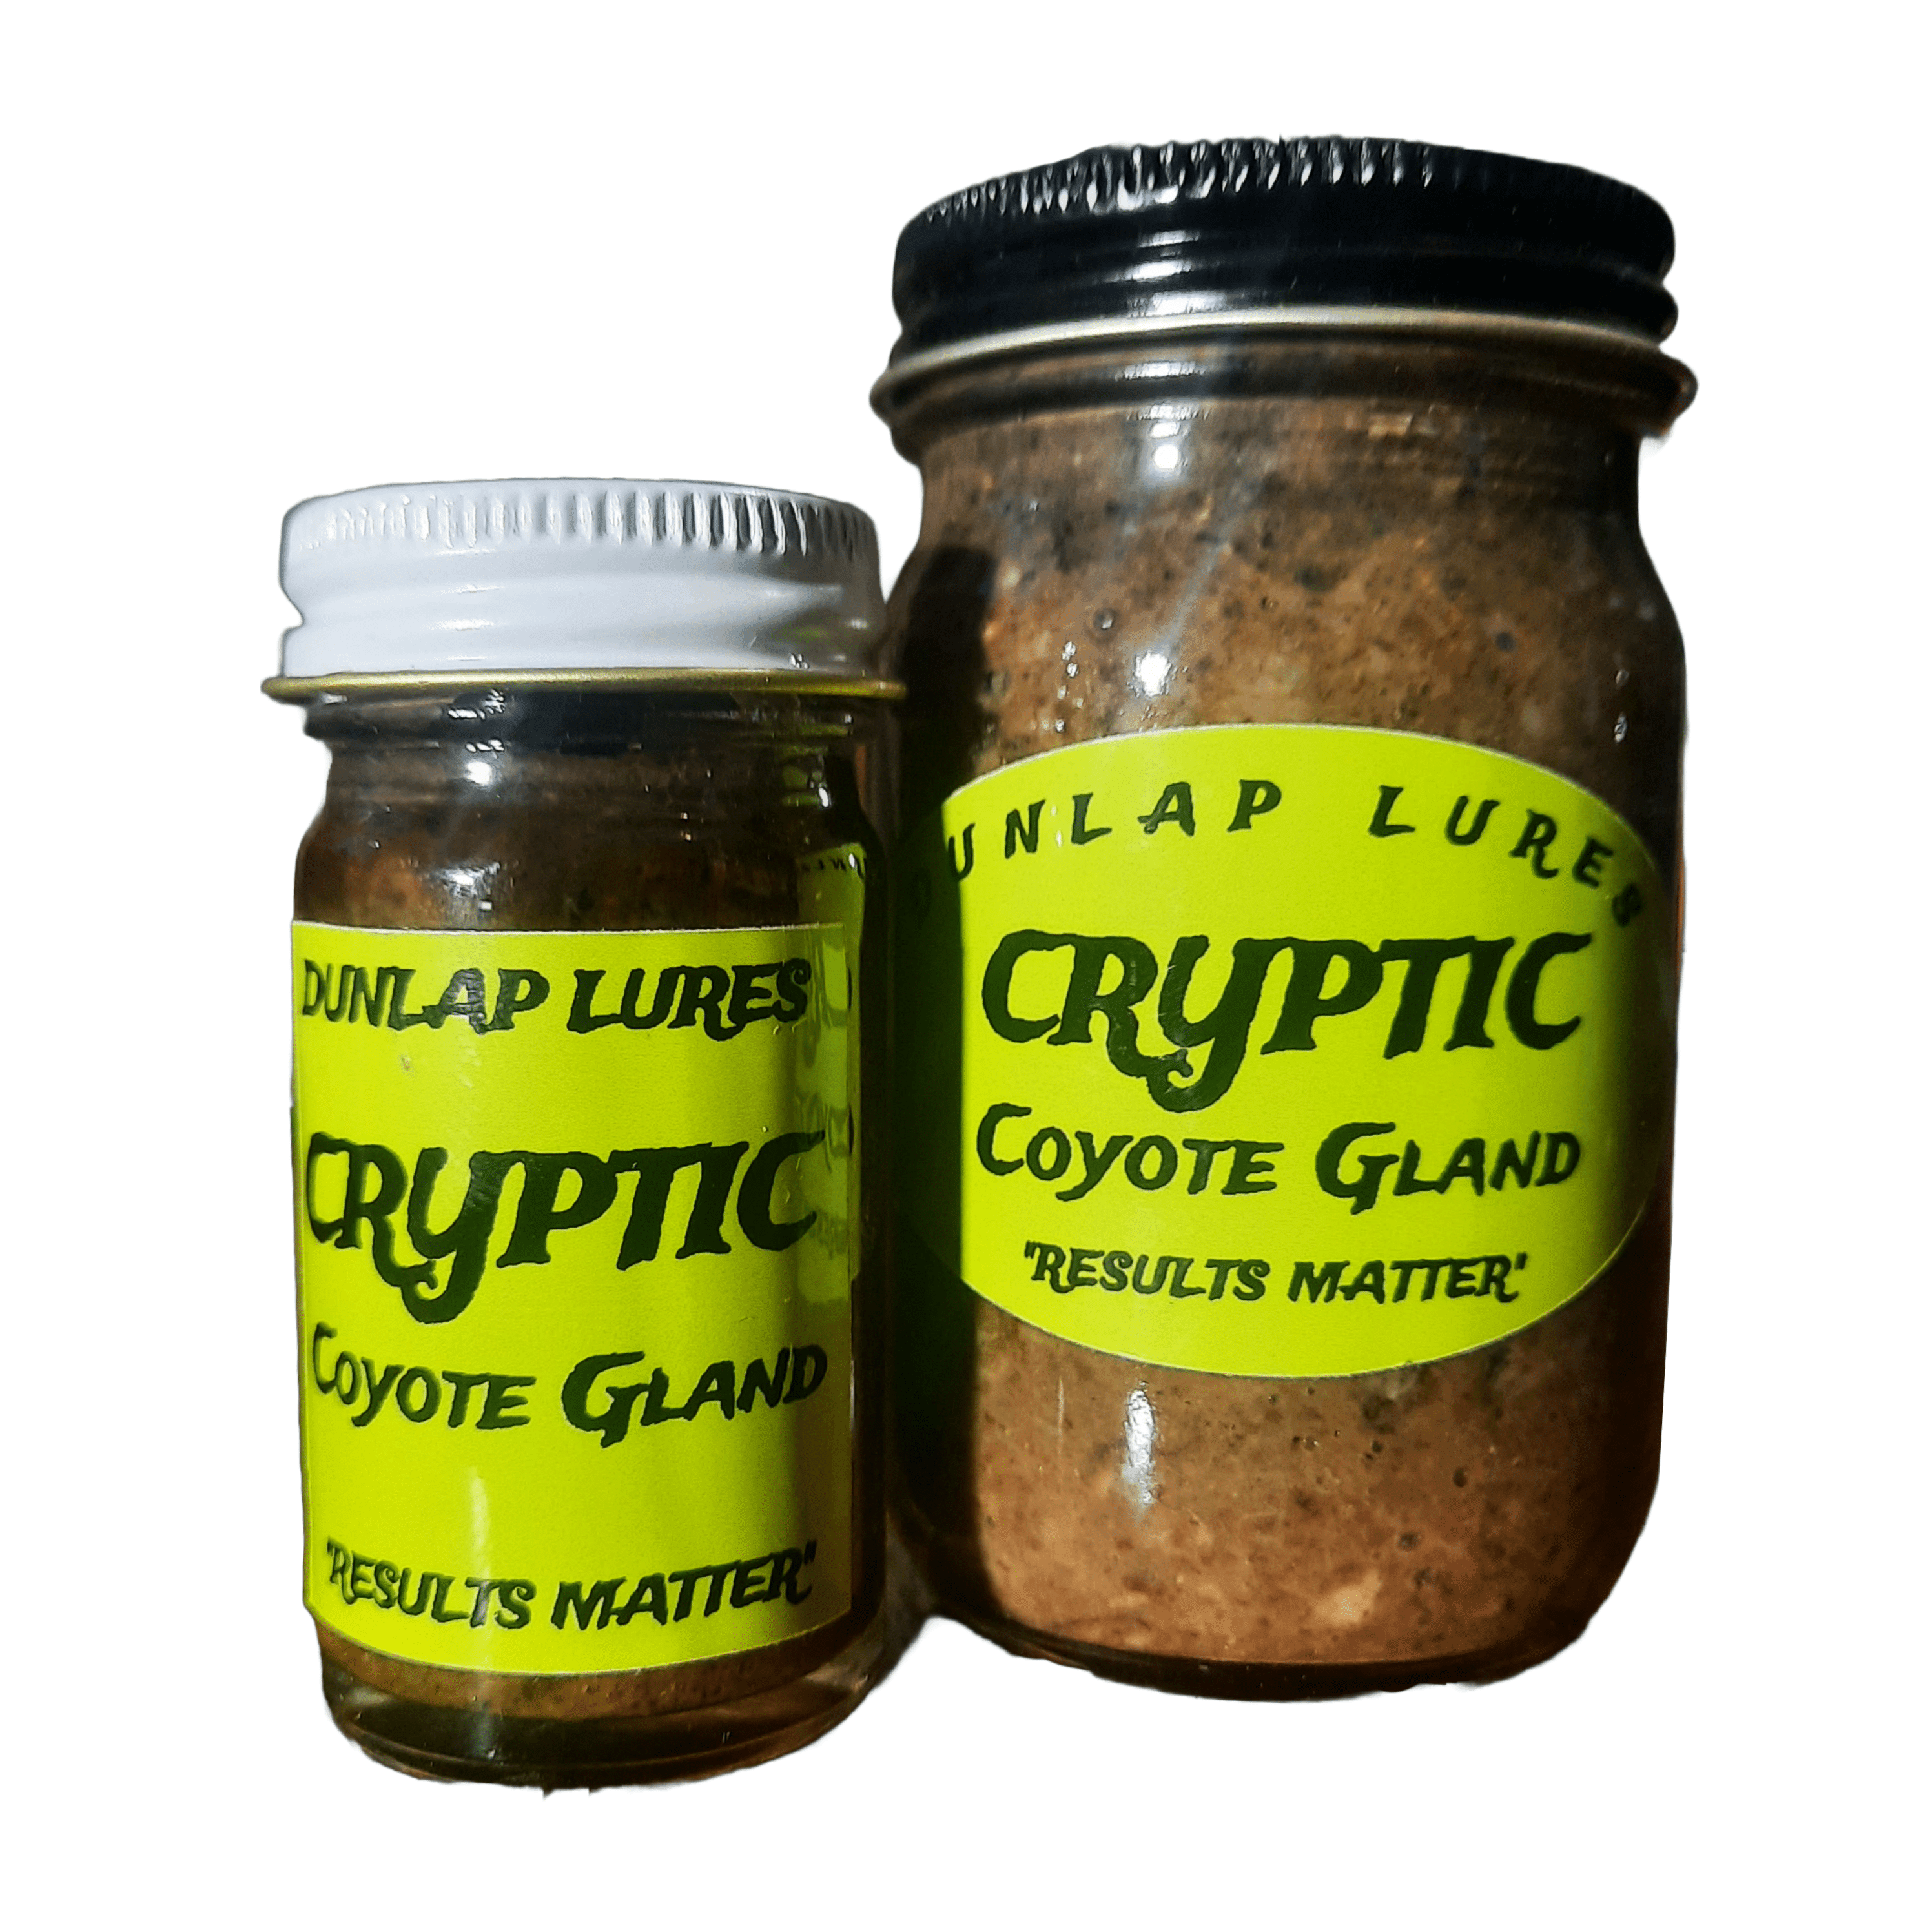 Dunlap's Cryptic Coyote Gland Lure, Size: 1 oz.